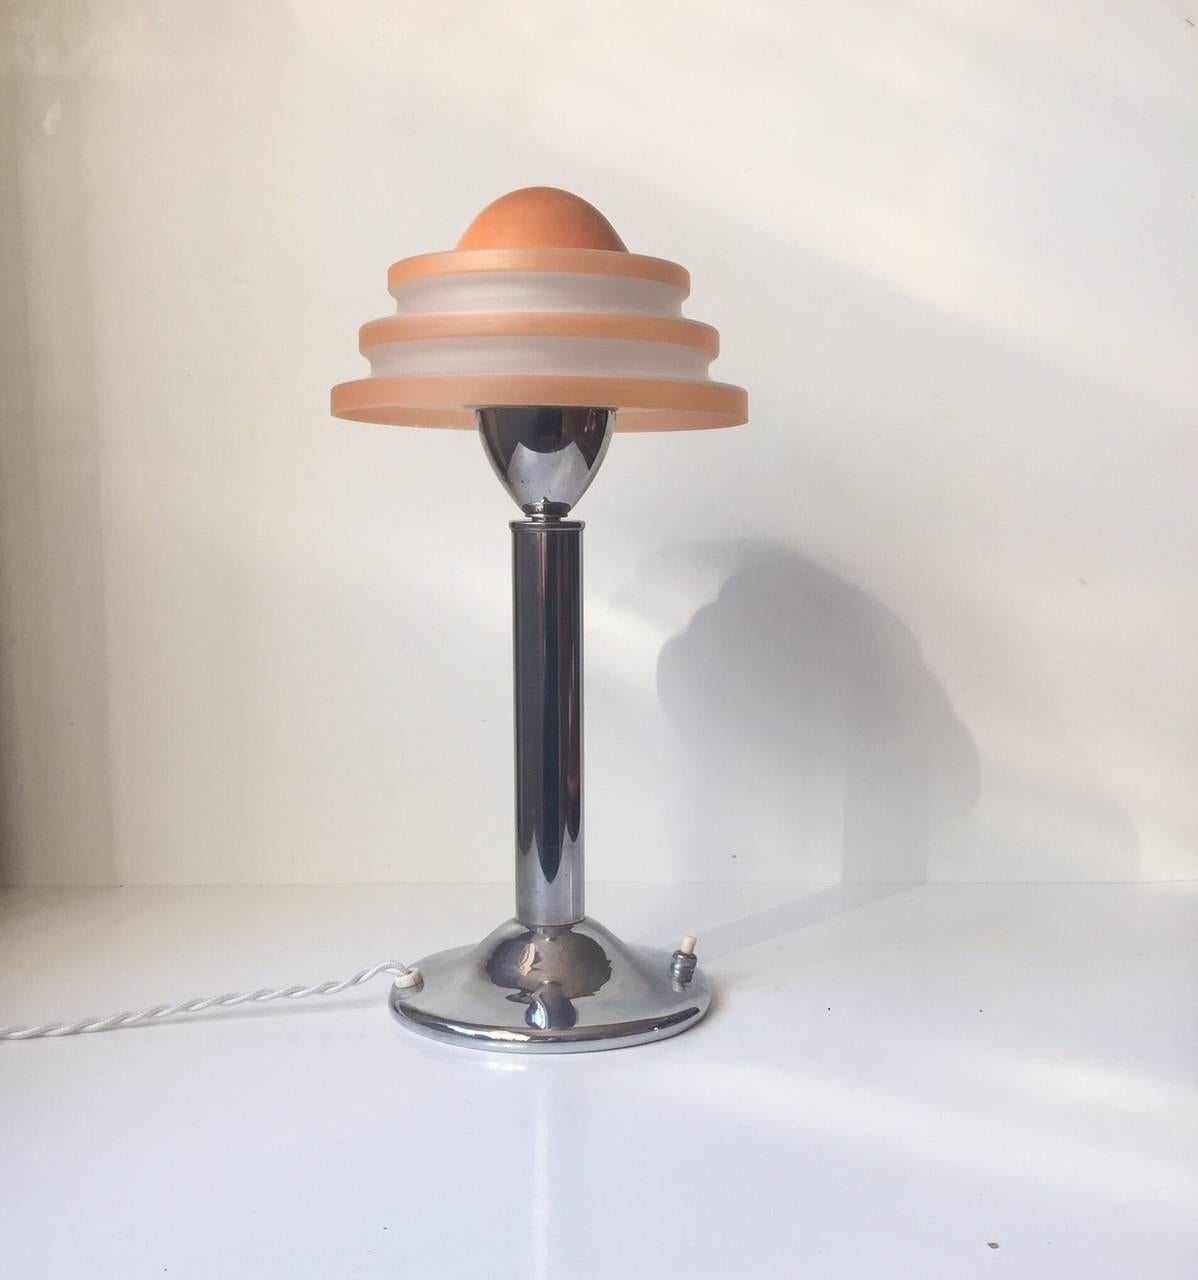 Original Funkis - Art Deco table lamp manufactured and designed by Danish Fog & Mørup during the 1930s. Beautiful and original condition with light ware.